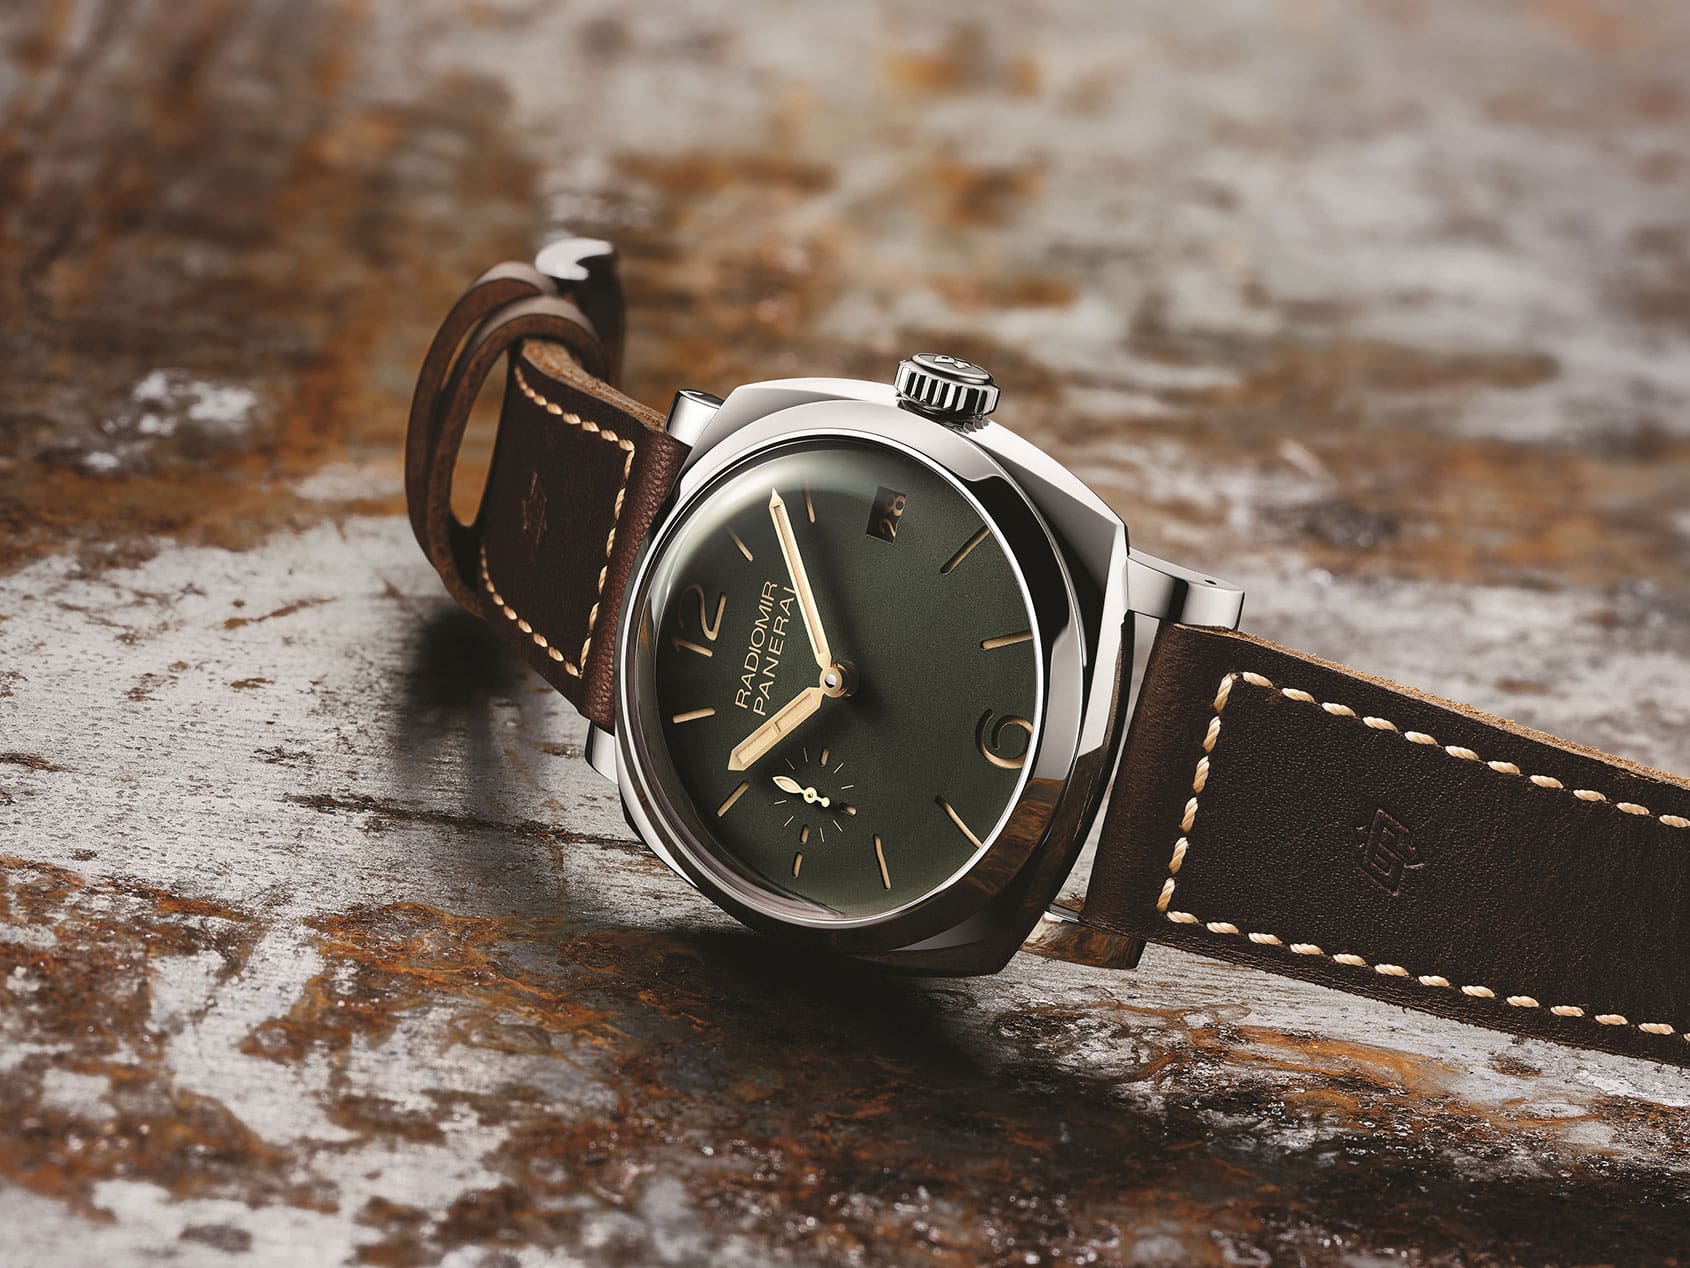 NEWS Panerai open first Australian boutique in Melbourne, and 2 standout models in stock right now